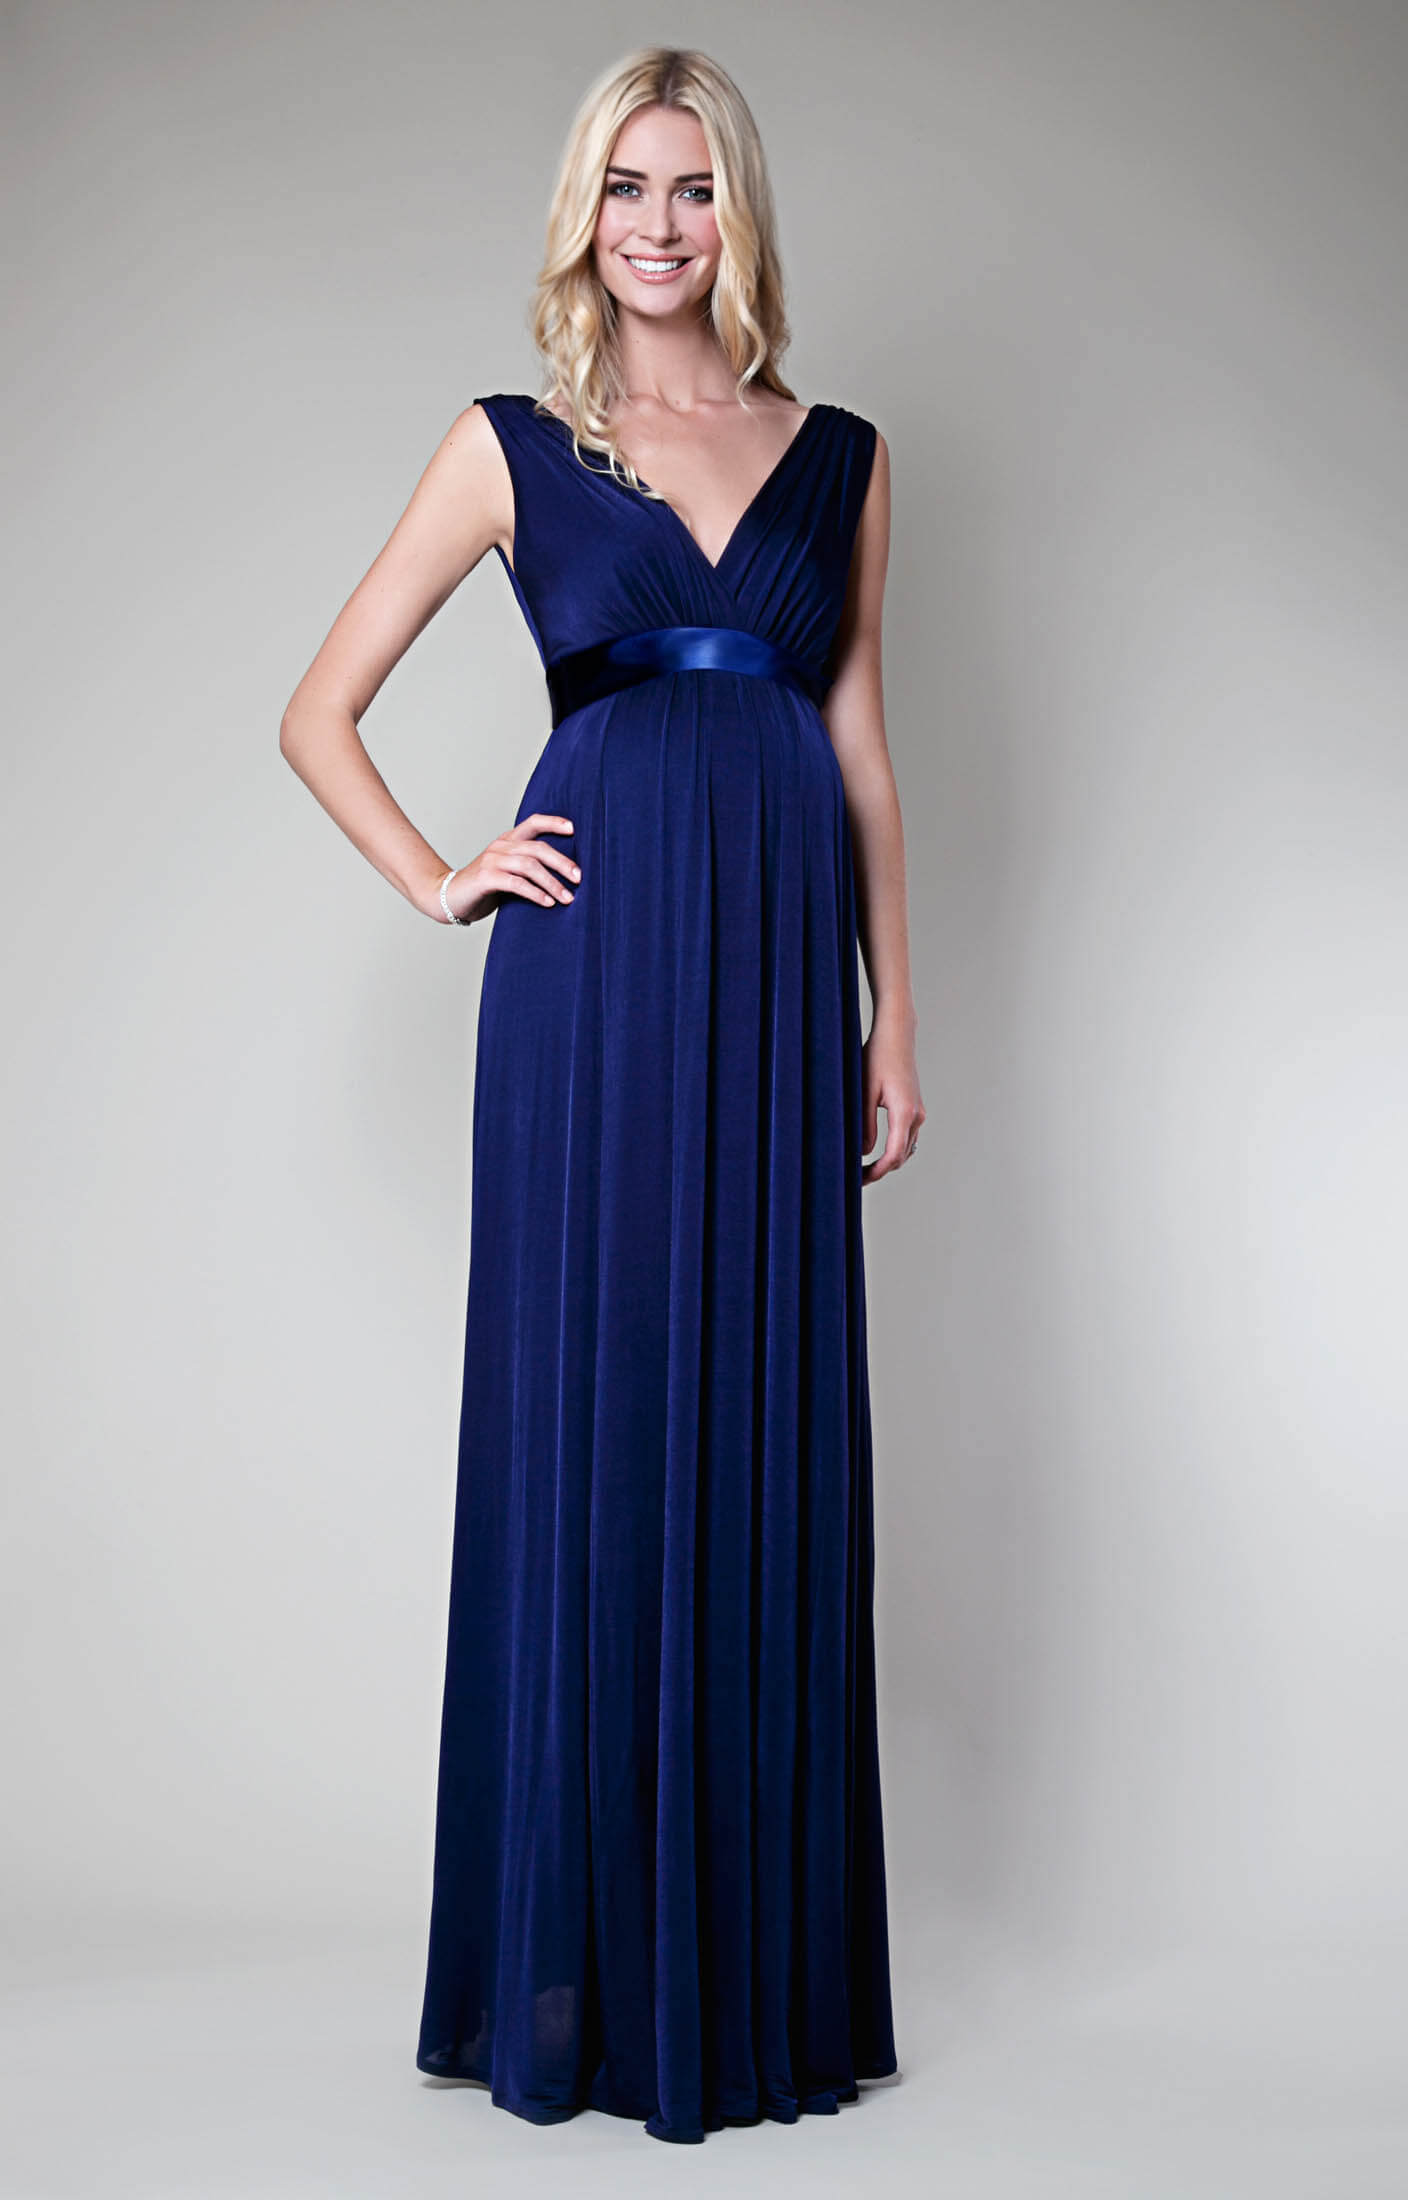 Anastasia Maternity Gown Eclipse Blue Maternity Wedding Dresses Evening Wear And Party